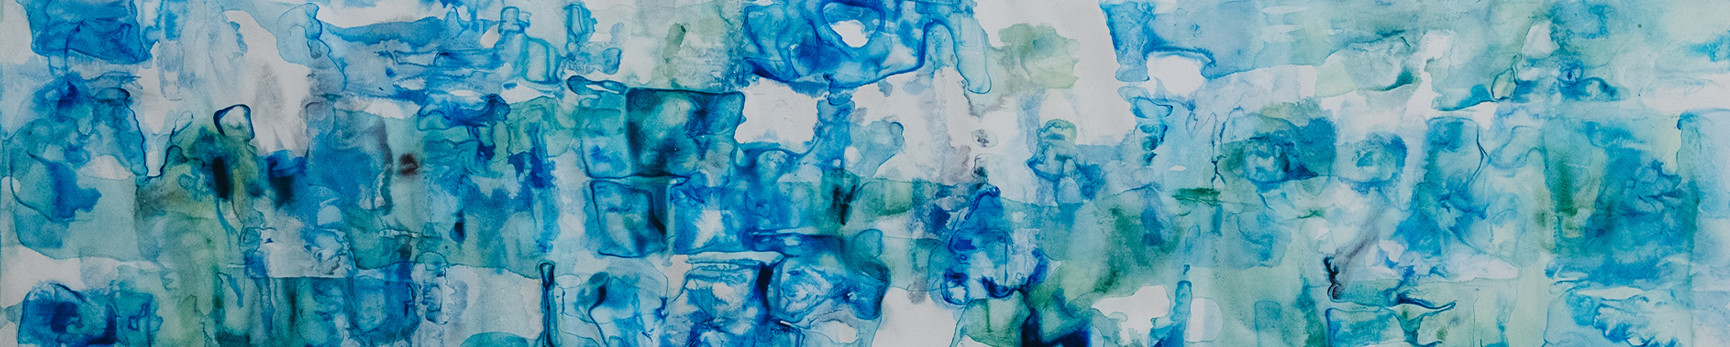 Abstract blue artwork creating using ink and ice